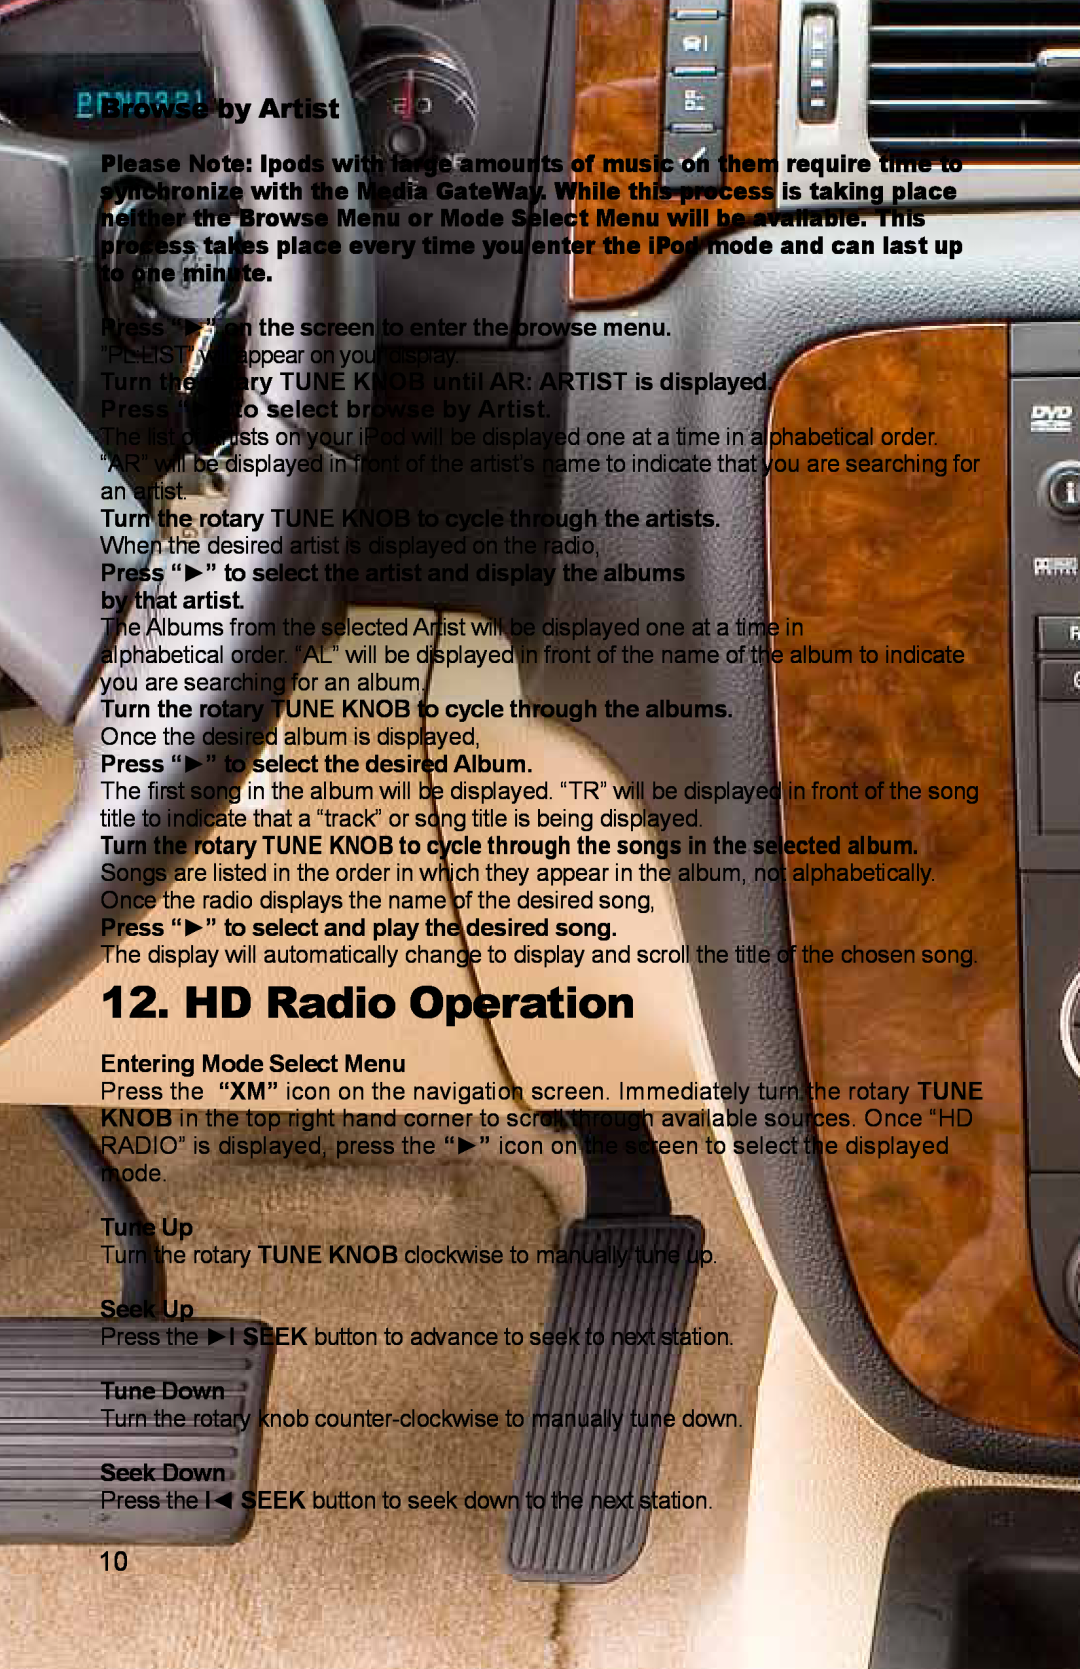 iSimple PGHGM1, PXAMG owner manual HD Radio Operation, Browse by Artist 